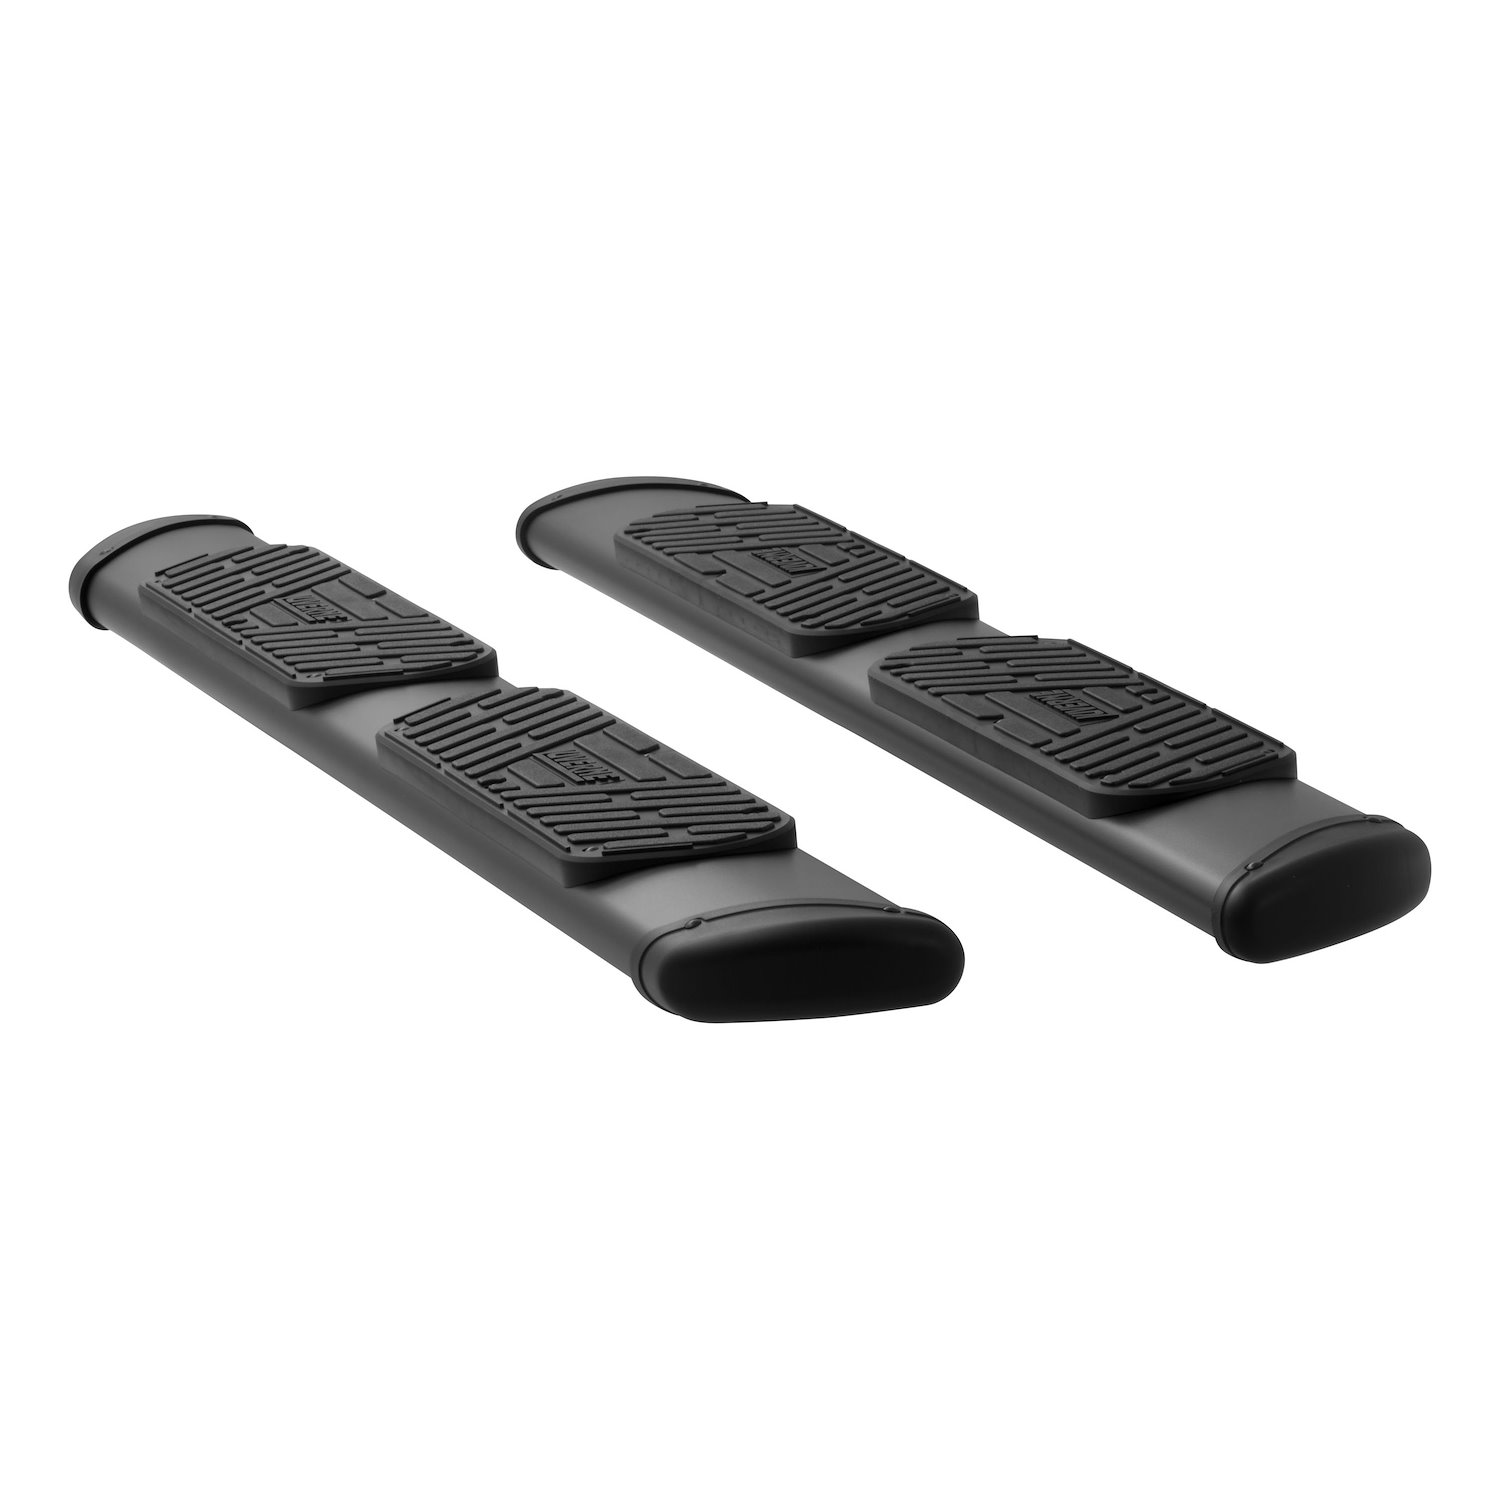 277078-401743 Regal 7 Black Stainless 78 in. Oval Side Steps Fits Select Chevy Silverado, GMC Sierra HD